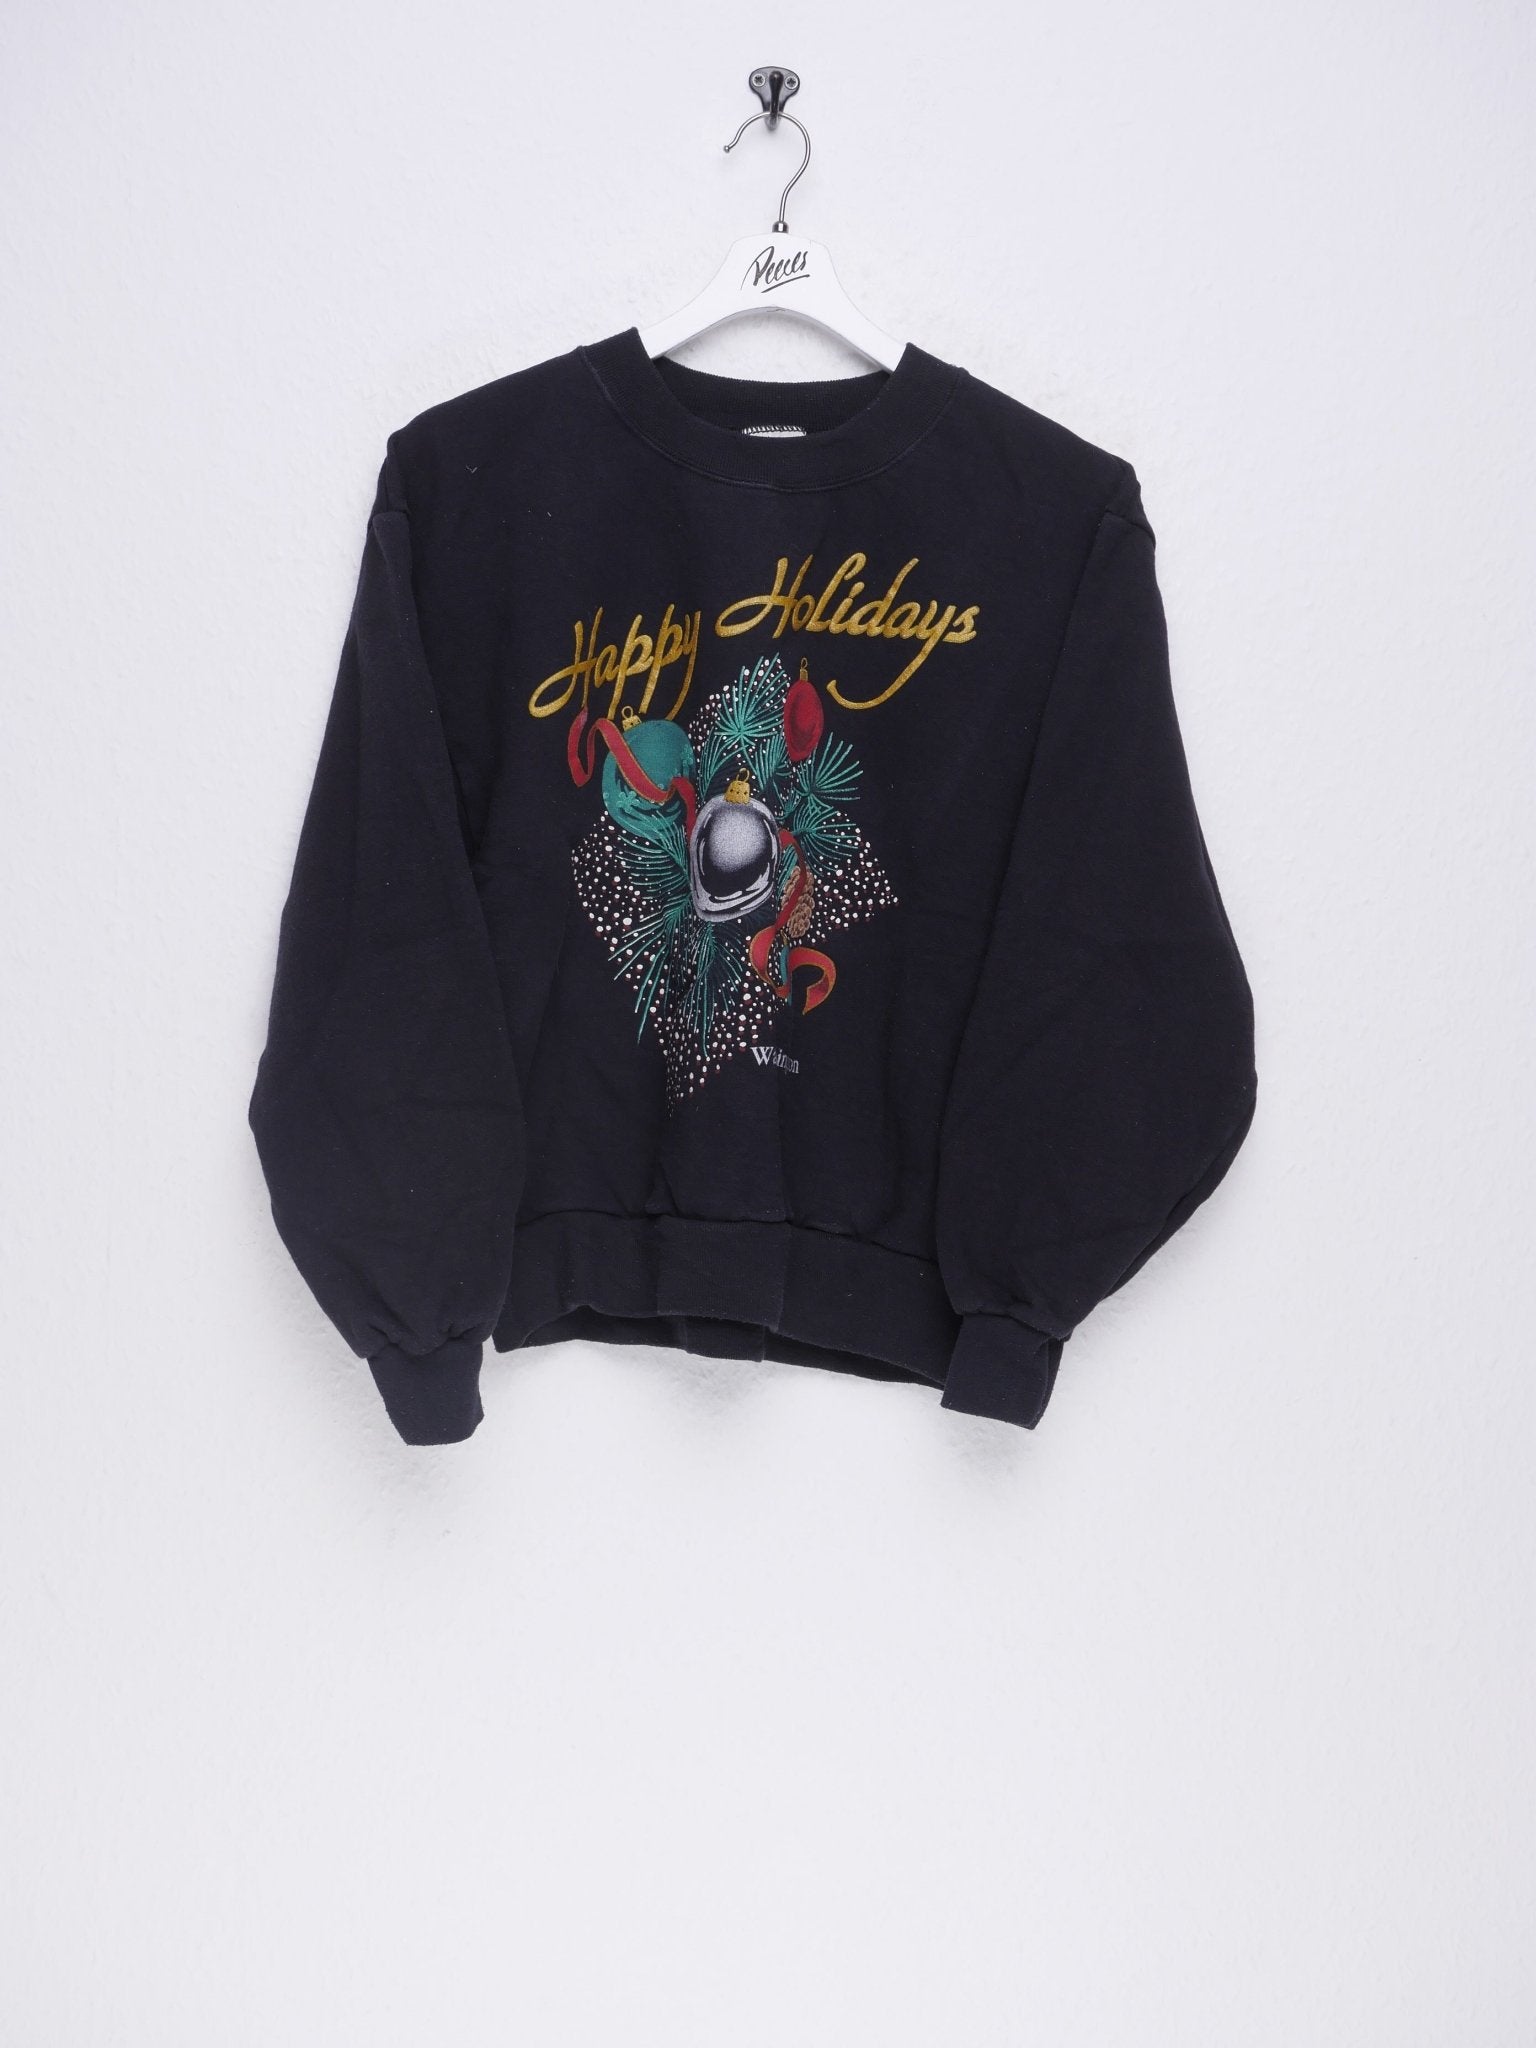 Happy Holidays printed Graphic Vintage Sweater - Peeces